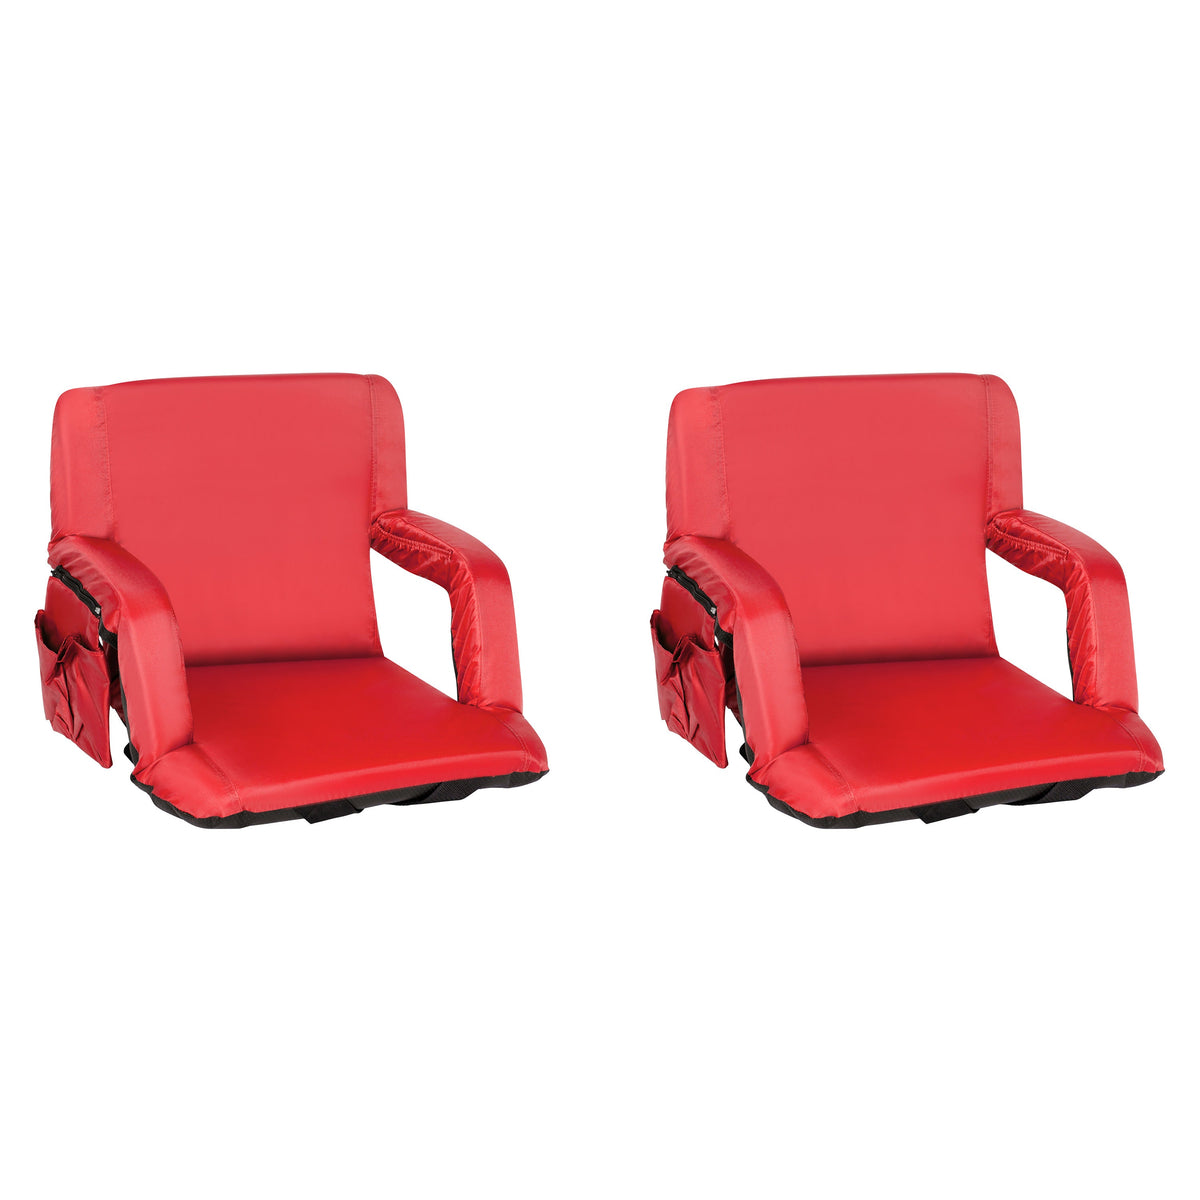 Red |#| 2 Pack Reclining Red Backpack Padded Stadium Chairs-Armrests & Storge Pockets